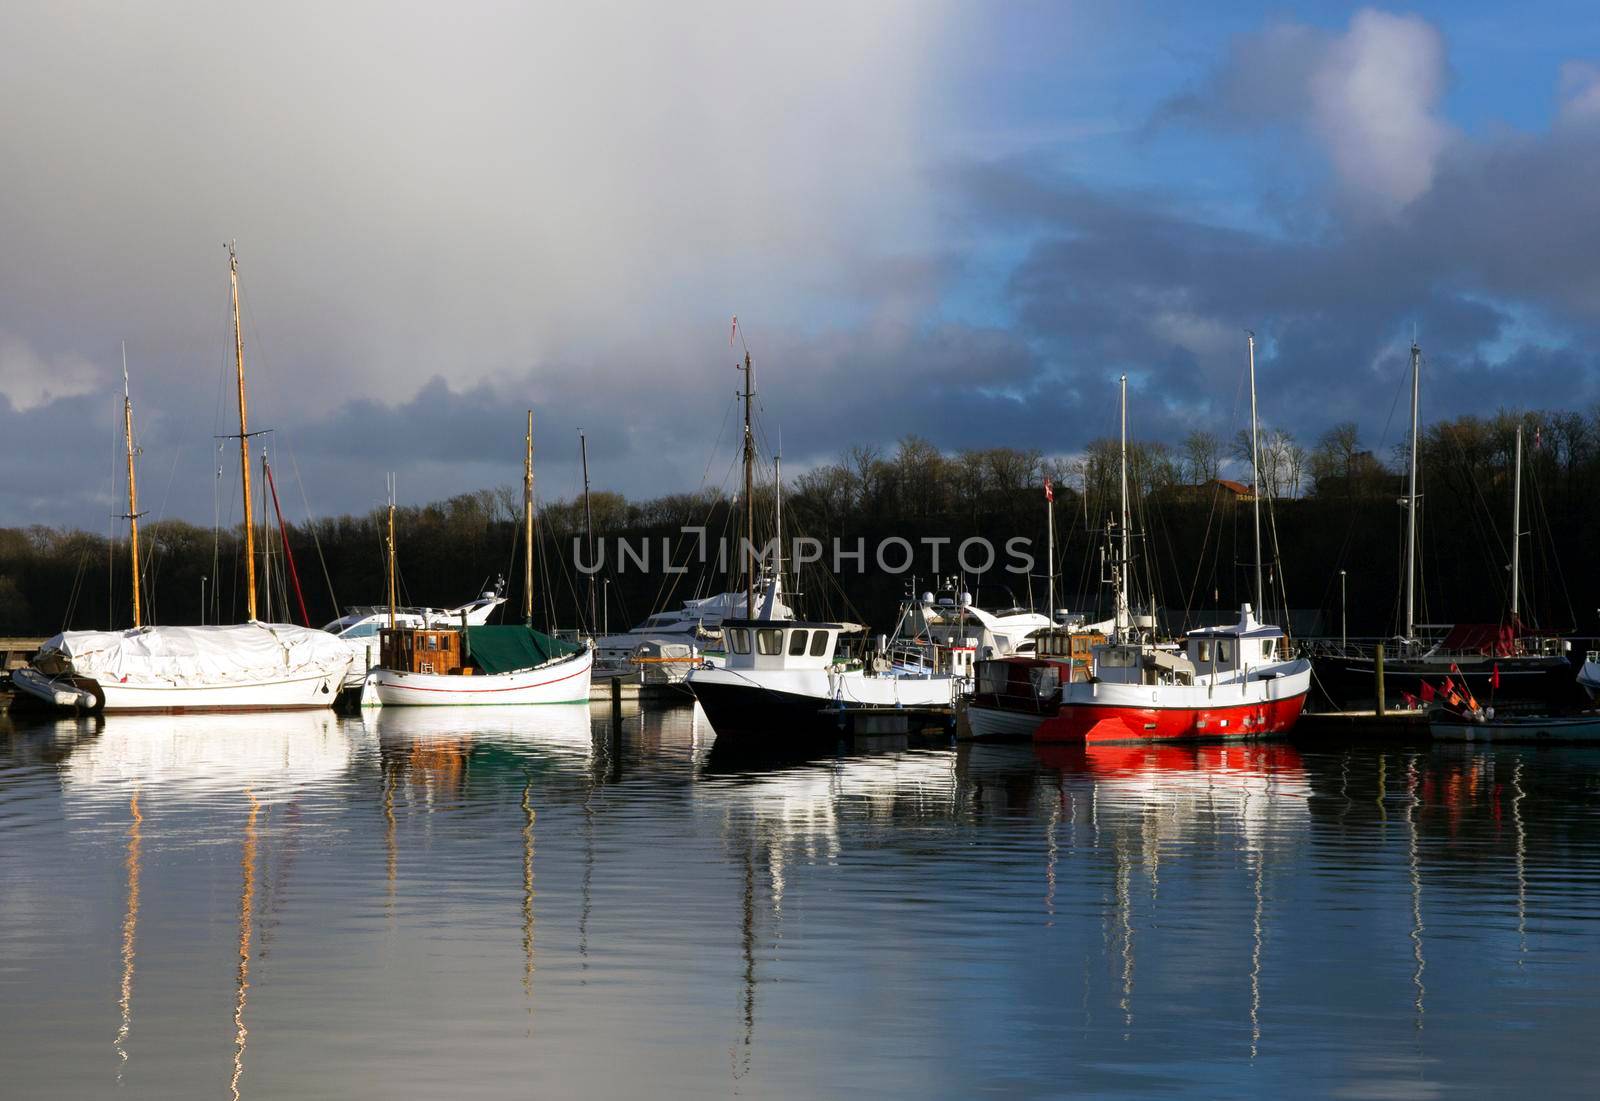 Sailing ships resting at the bay by Lirch